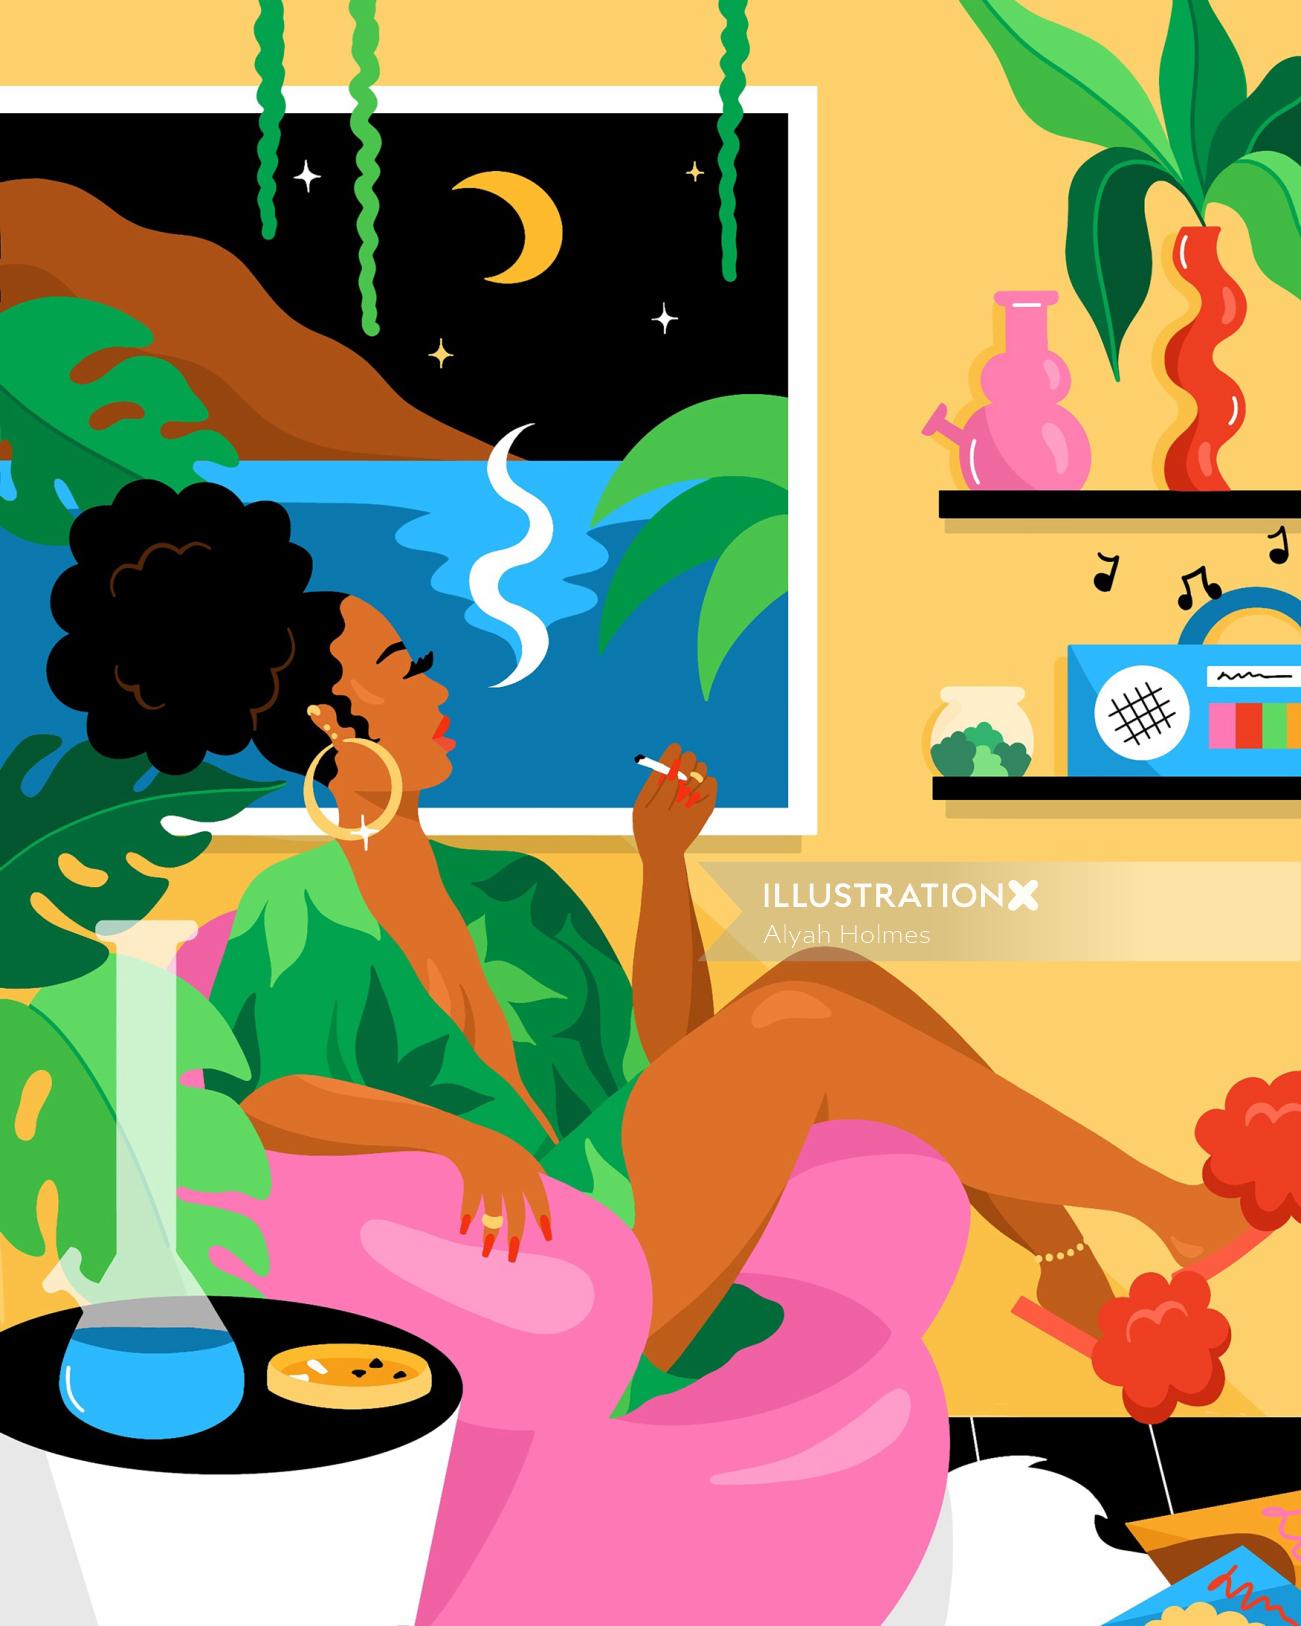 Self-initiated poster by Alyah of Miss MJ enjoying weed